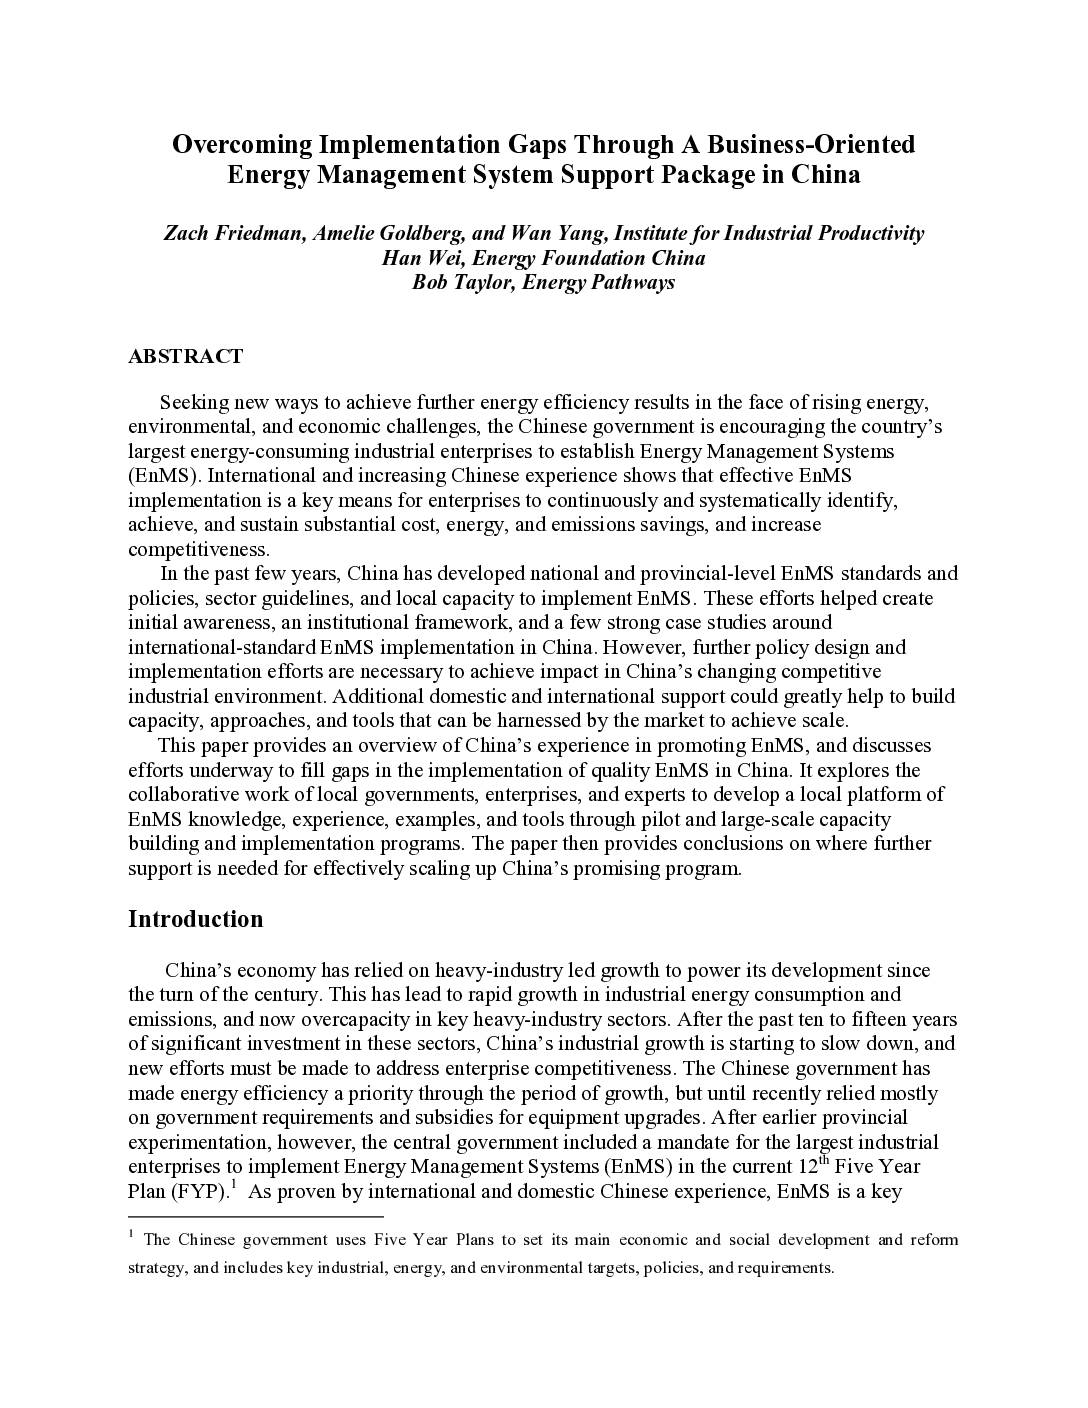 Overcoming Implementation Gaps Through A Business-Oriented Energy Management System Support Package in China